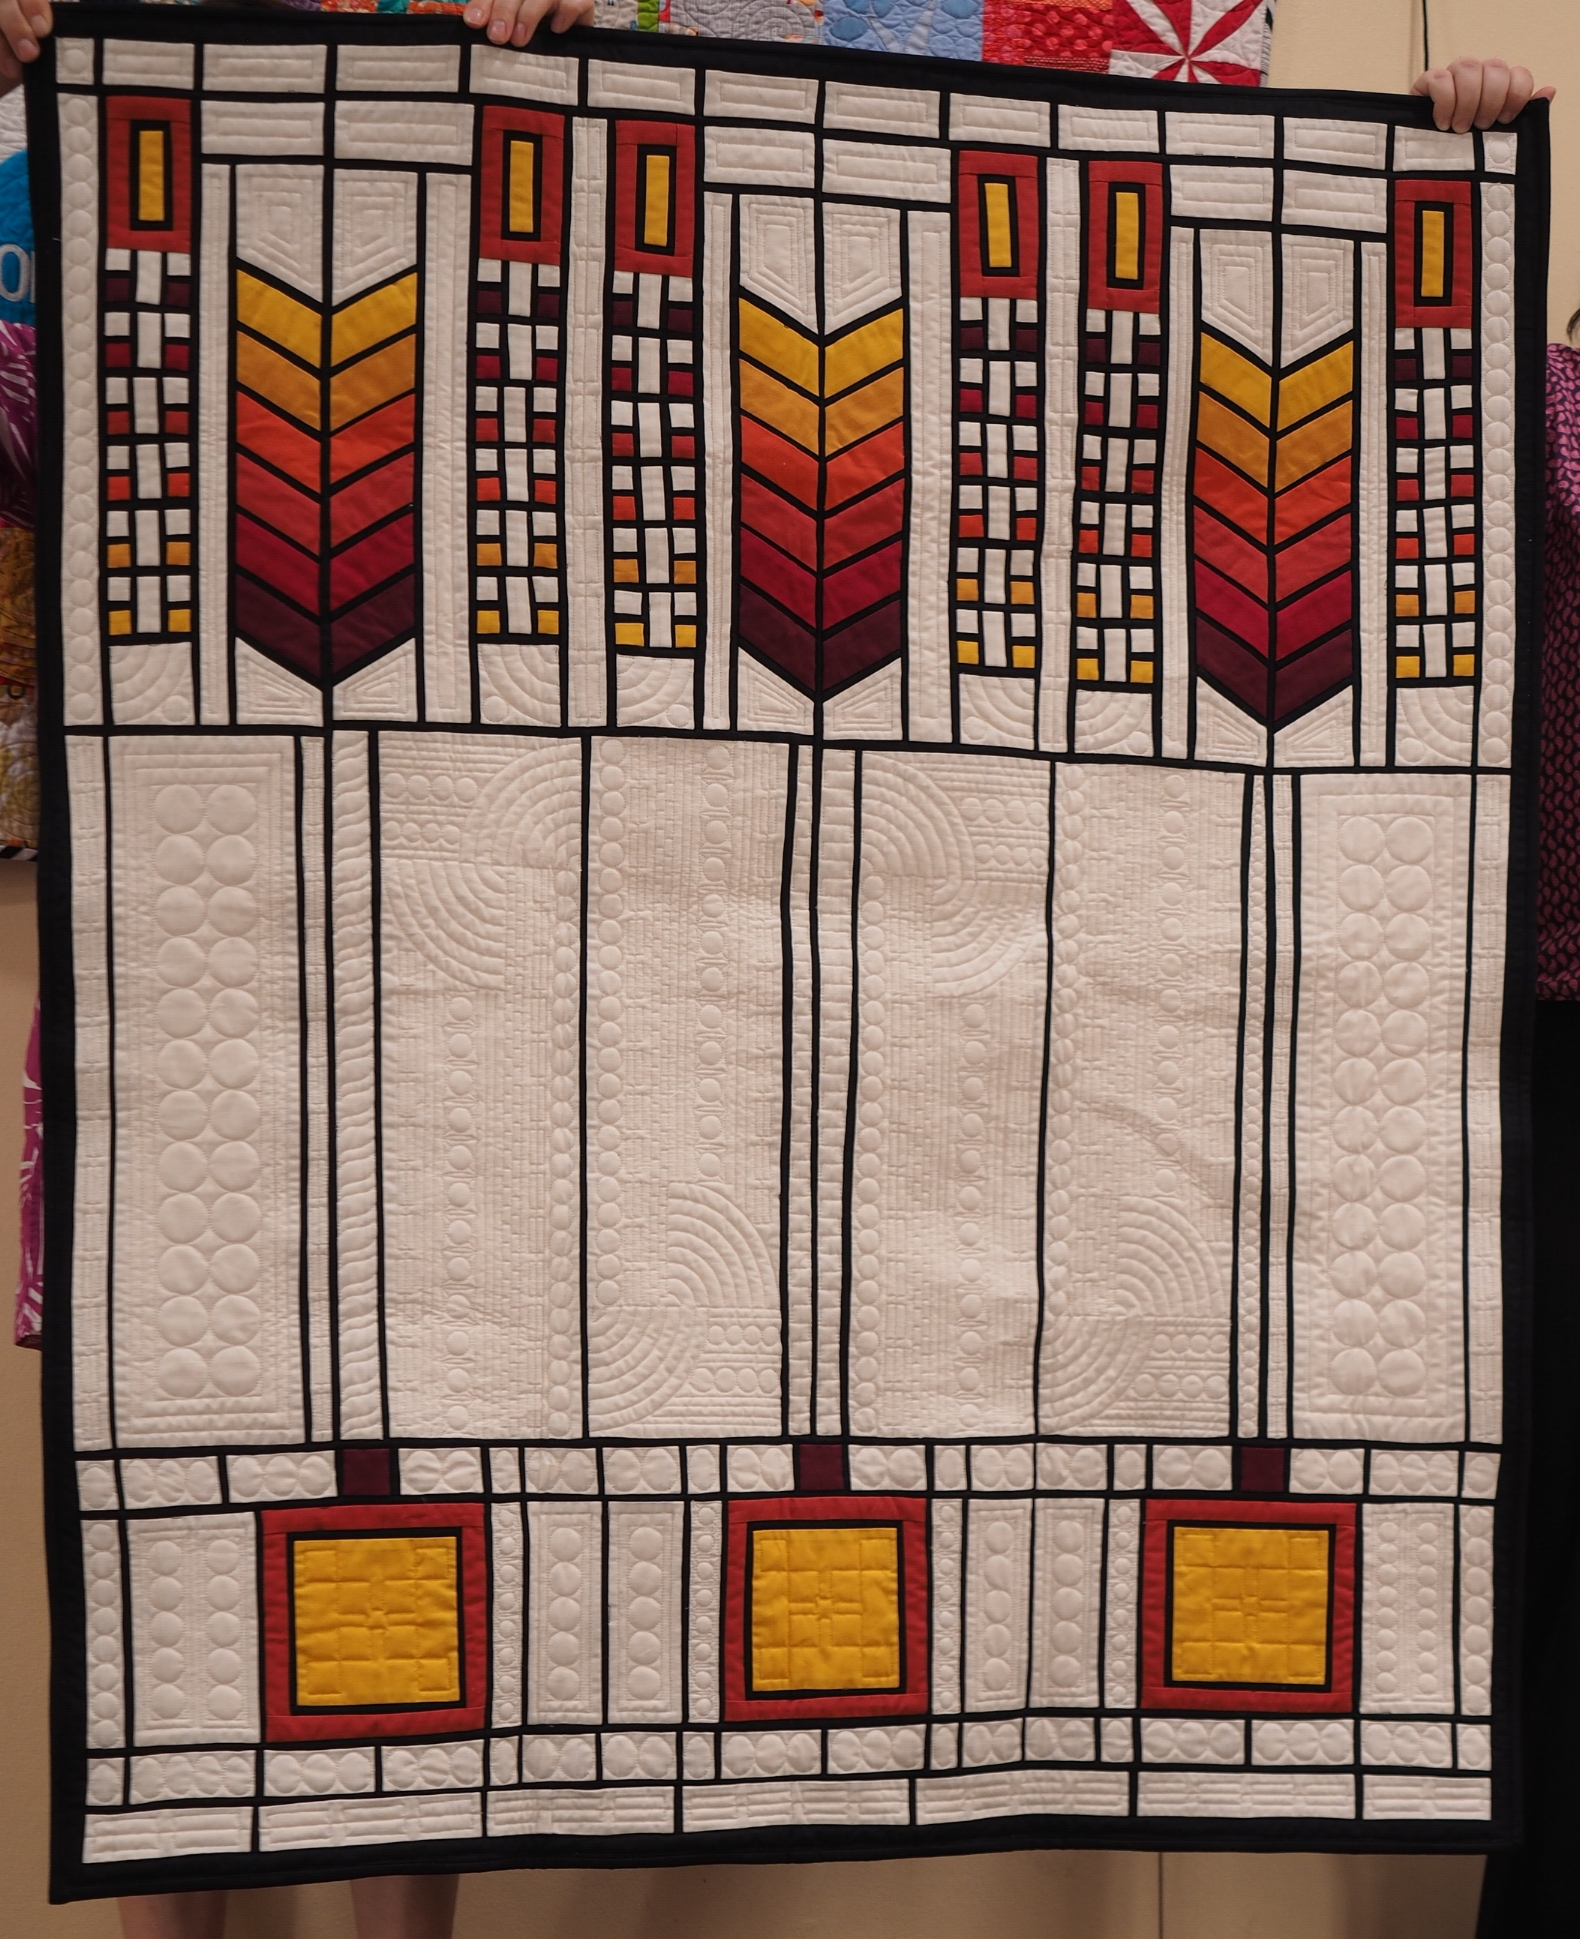  Emilie Kahn  Tree of Life  @patchworkninja  Frank Lloyd Wright Pattern  Quilted by Nancy Stovall 